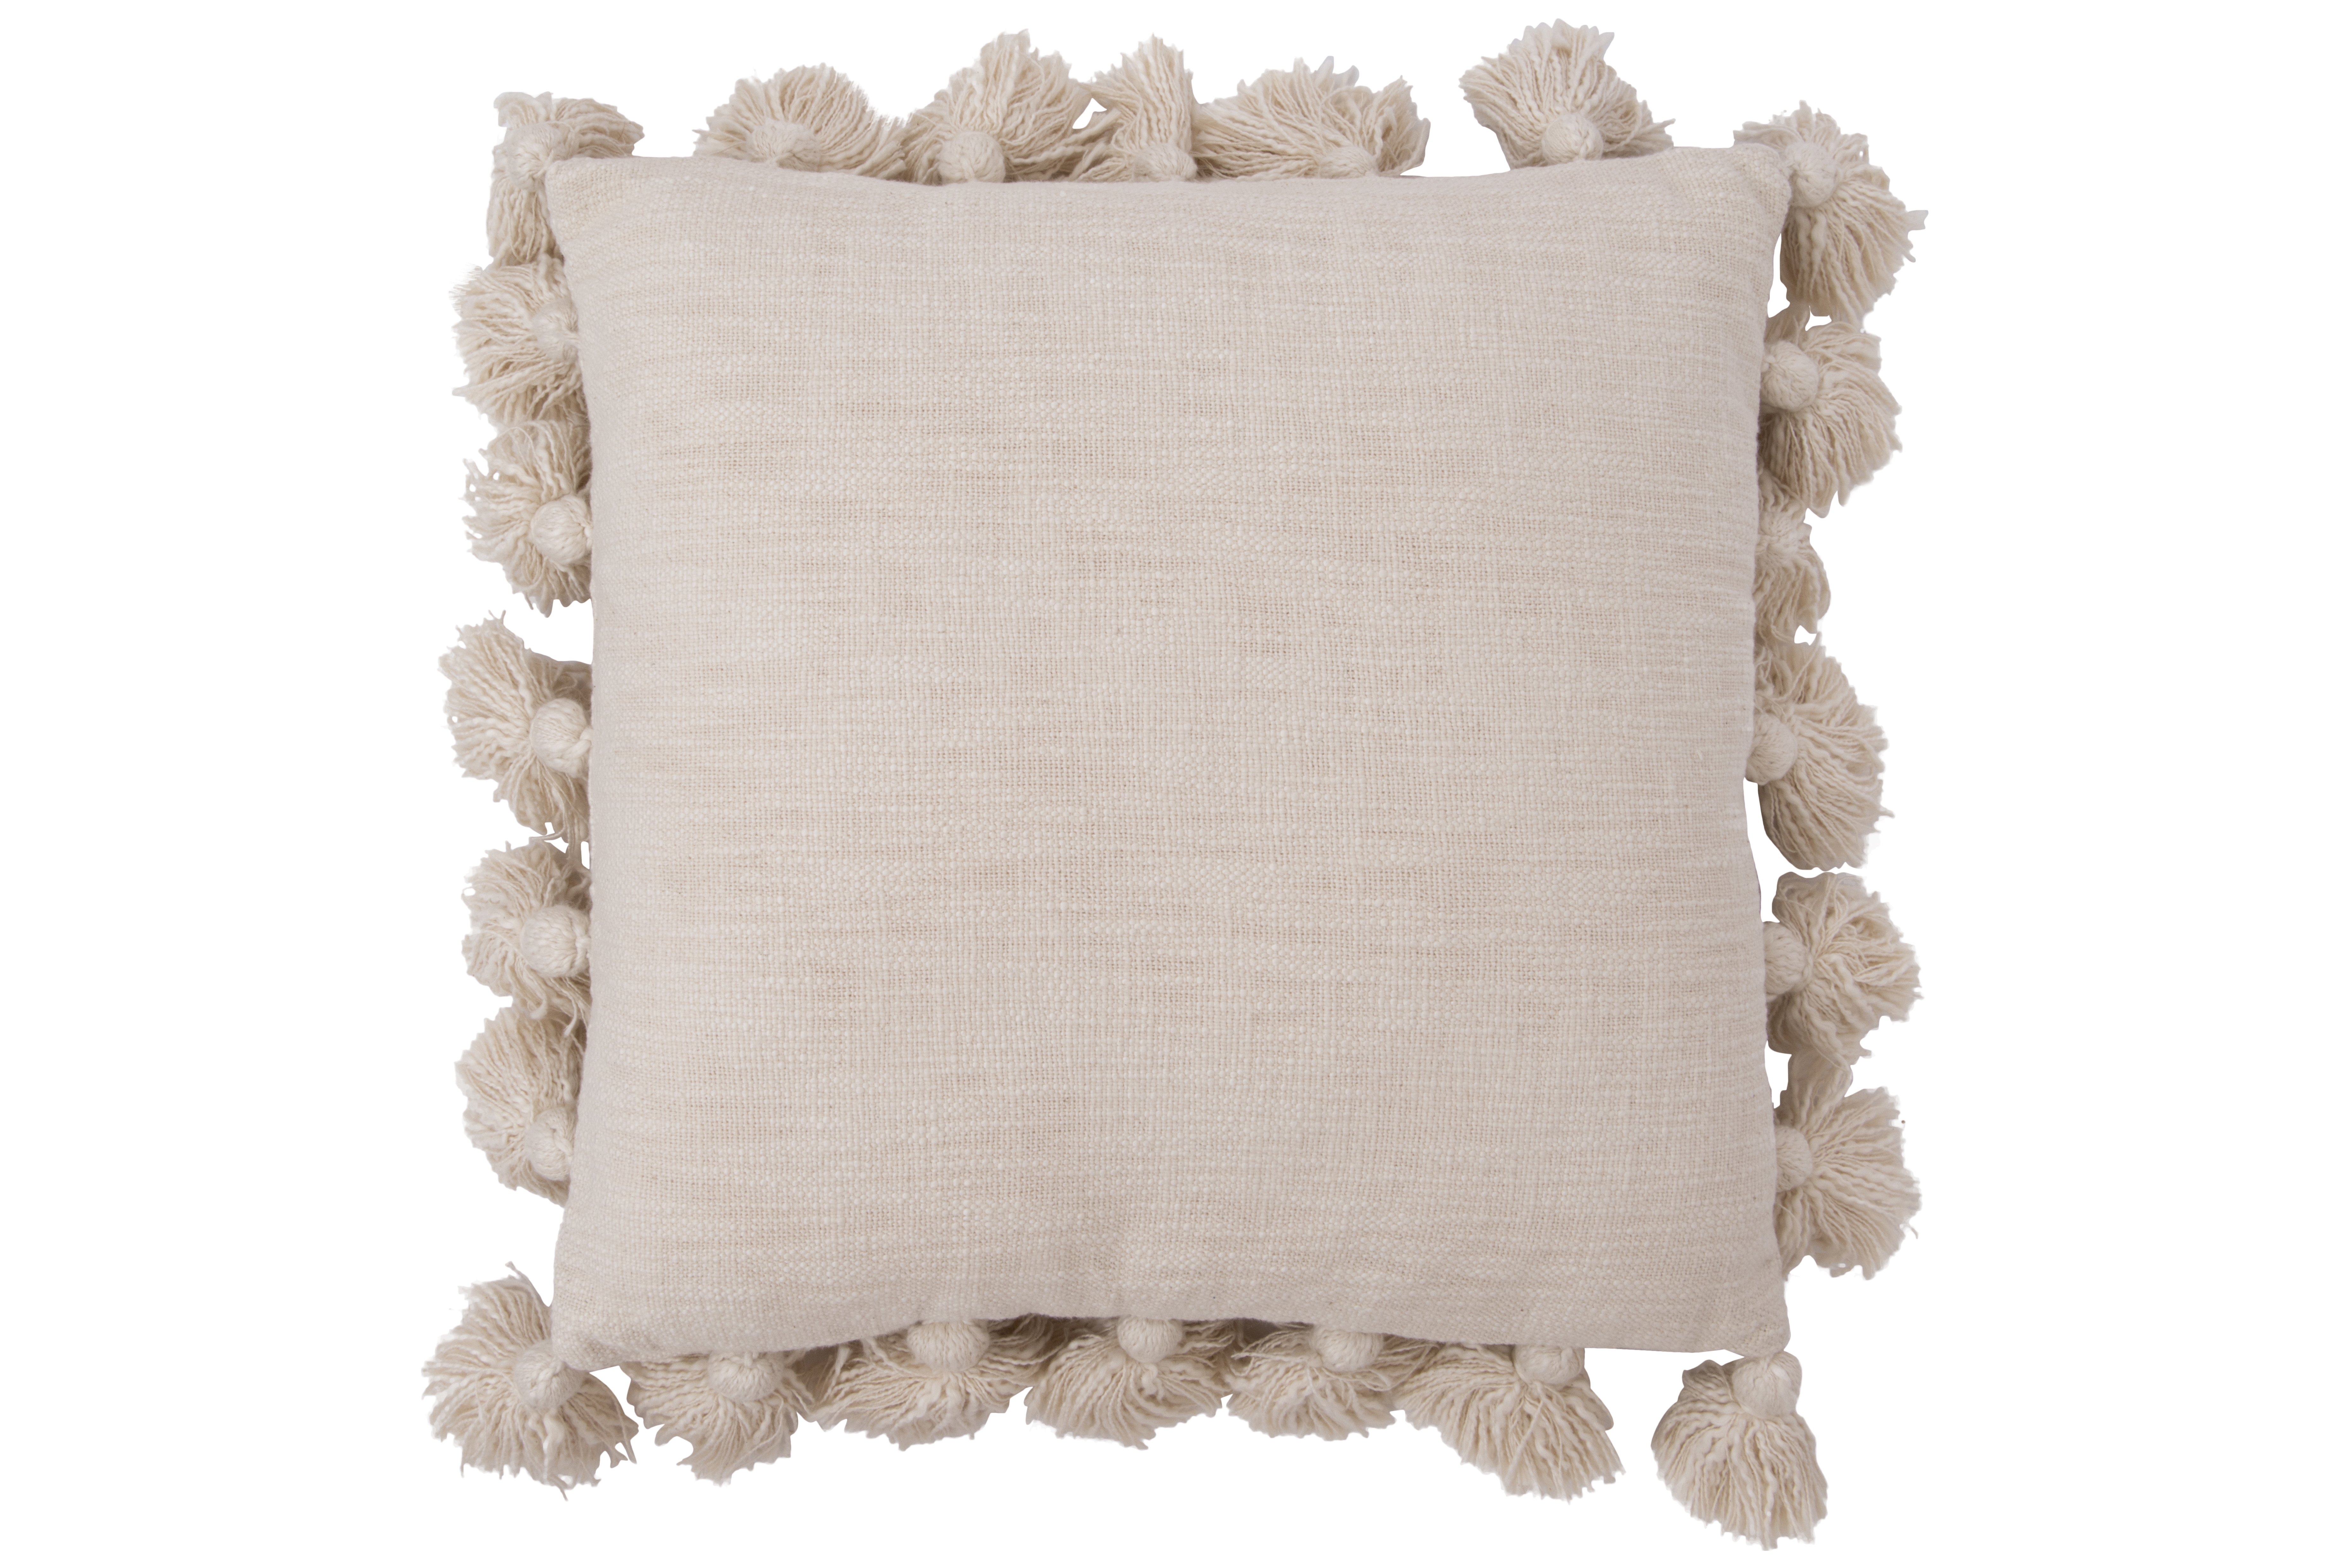 Luxurious Cream Square Cotton Woven Slub Pillow with Tassels - Nomad Home